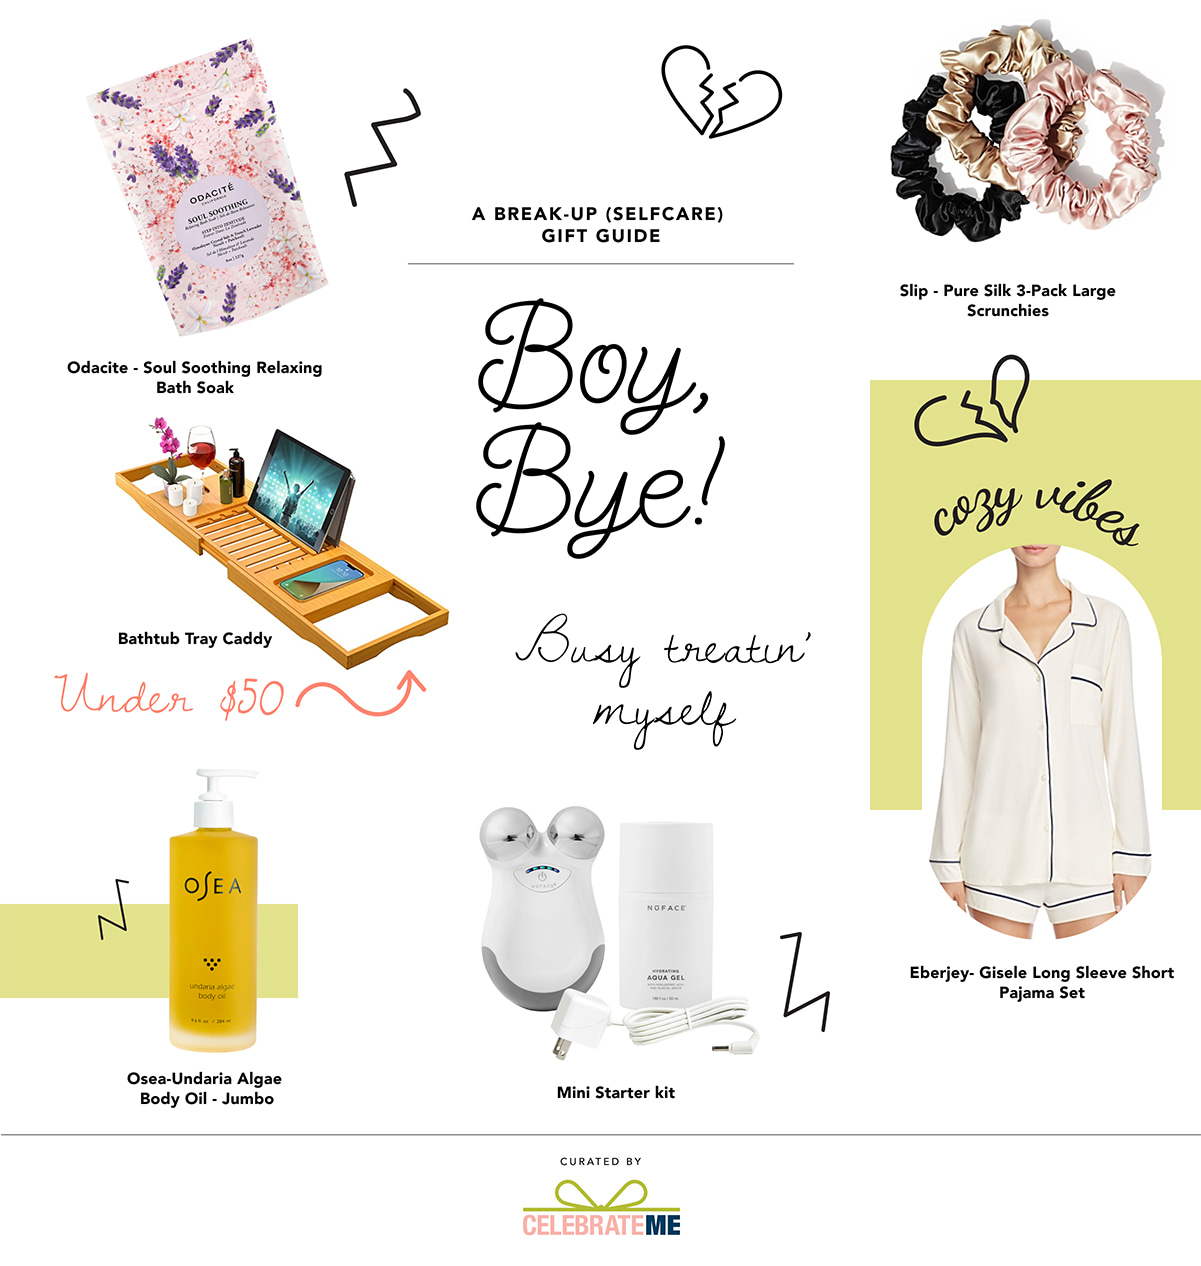 Boy, Bye! products collage